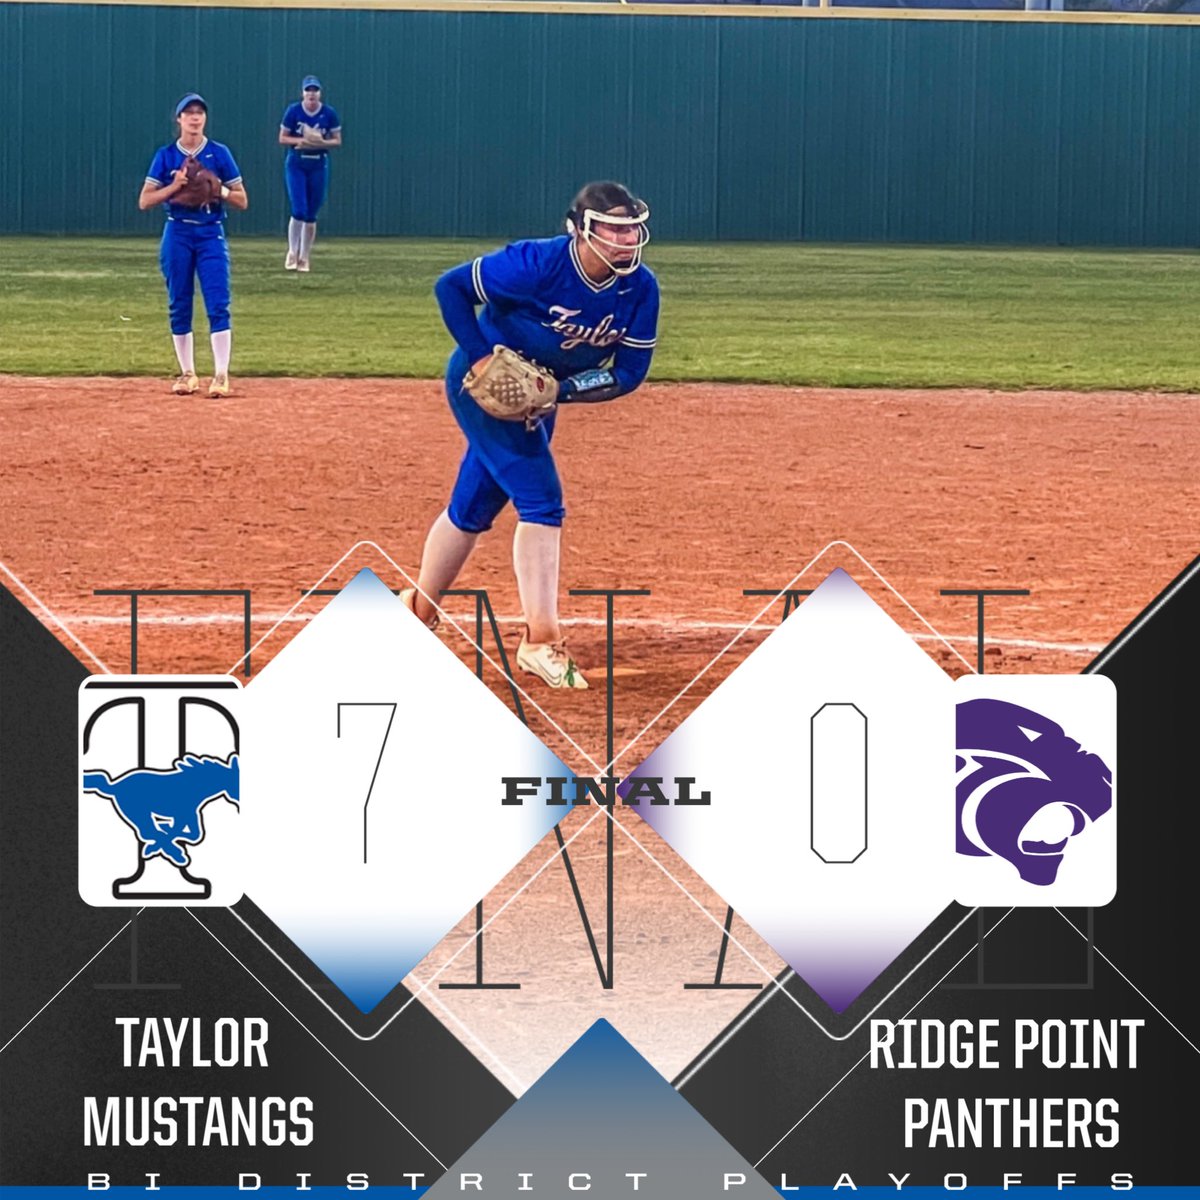 Taylor defeats Ridge Point 7-0 to take game 1 in the bi district round of the playoffs!